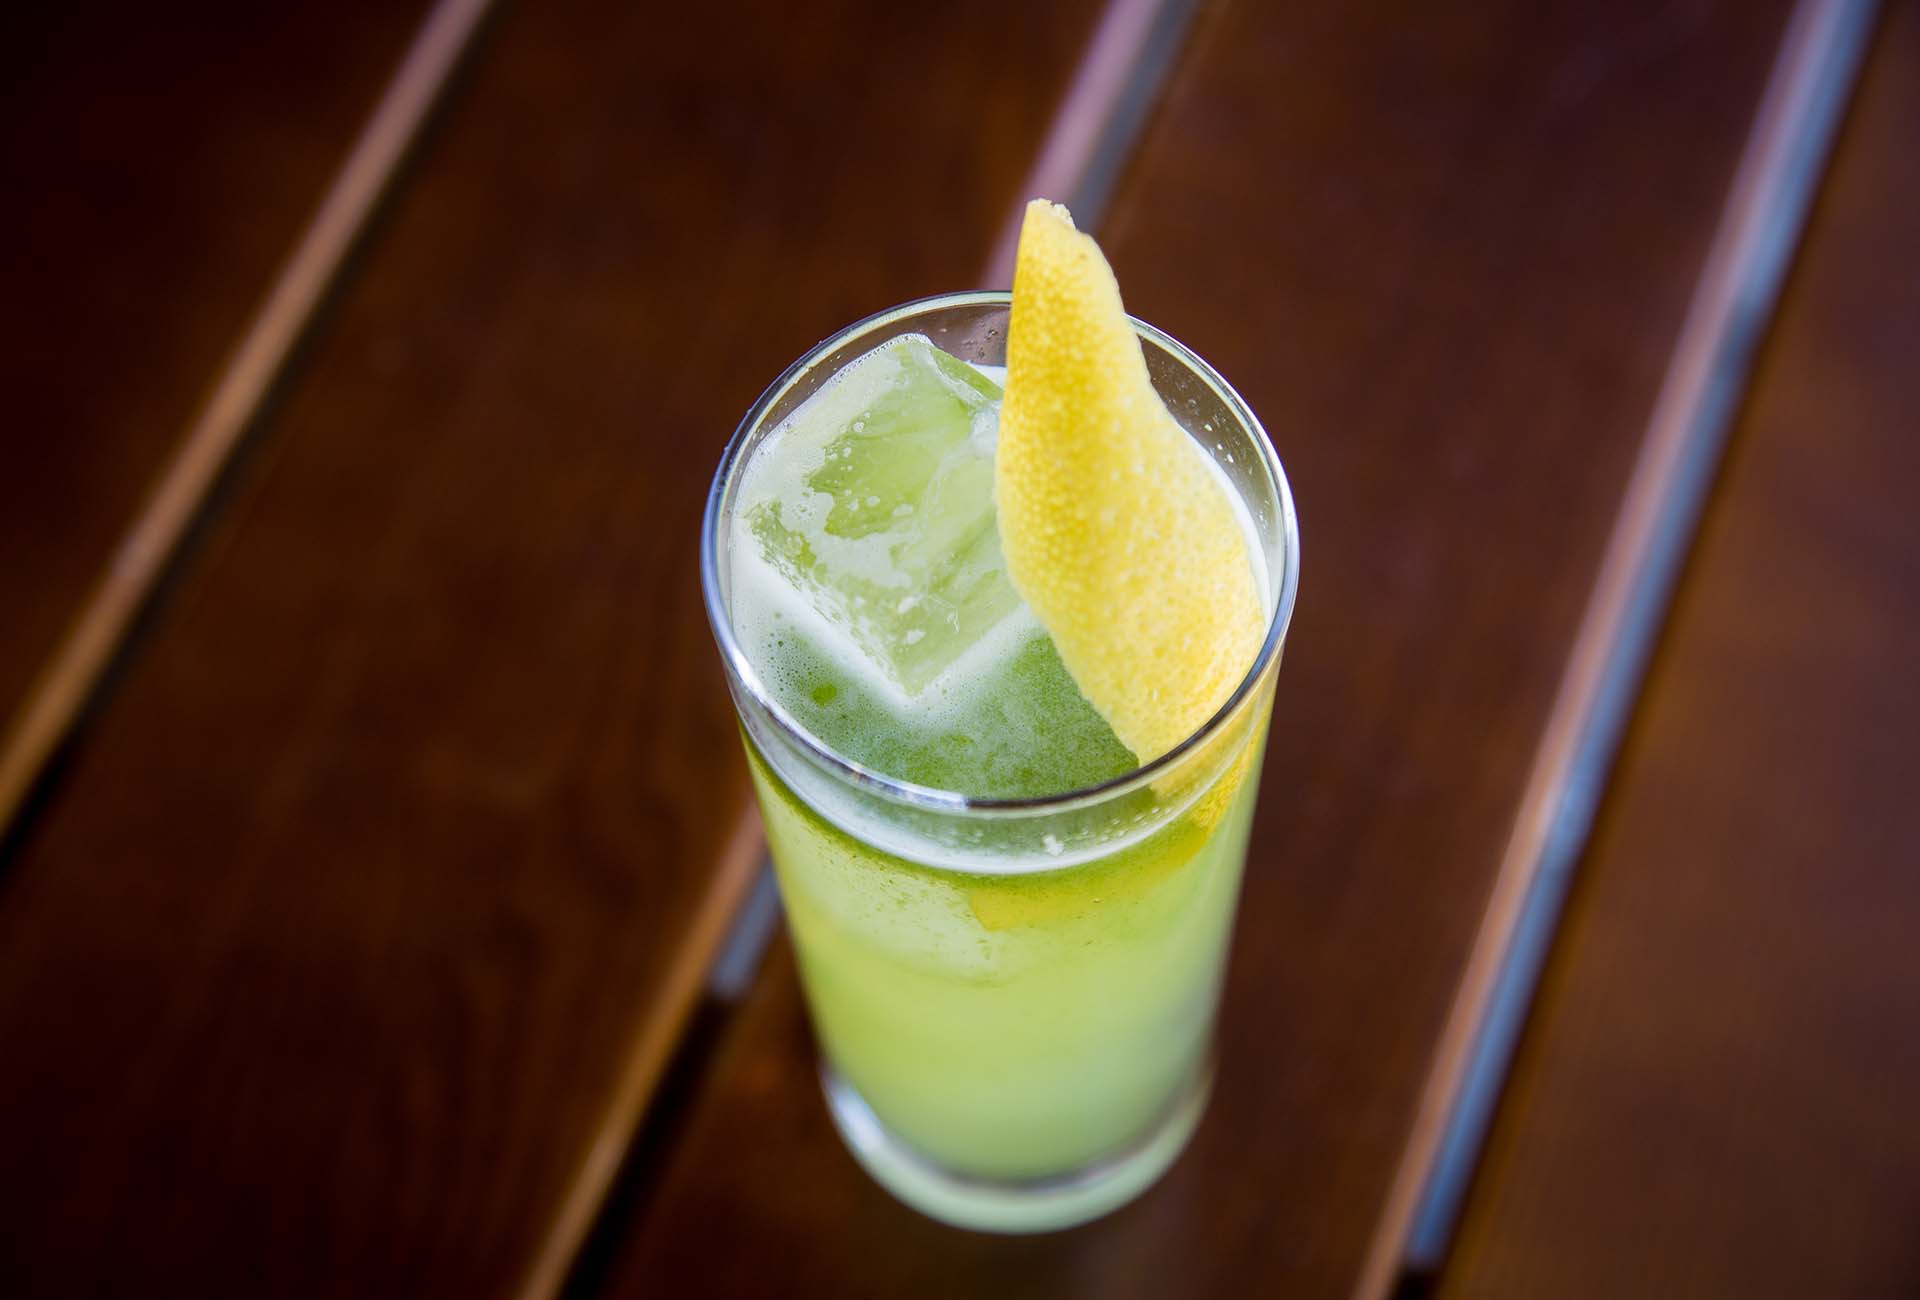 The Tarragon is a simple refreshing drink using tarragon syrup lemon and soda